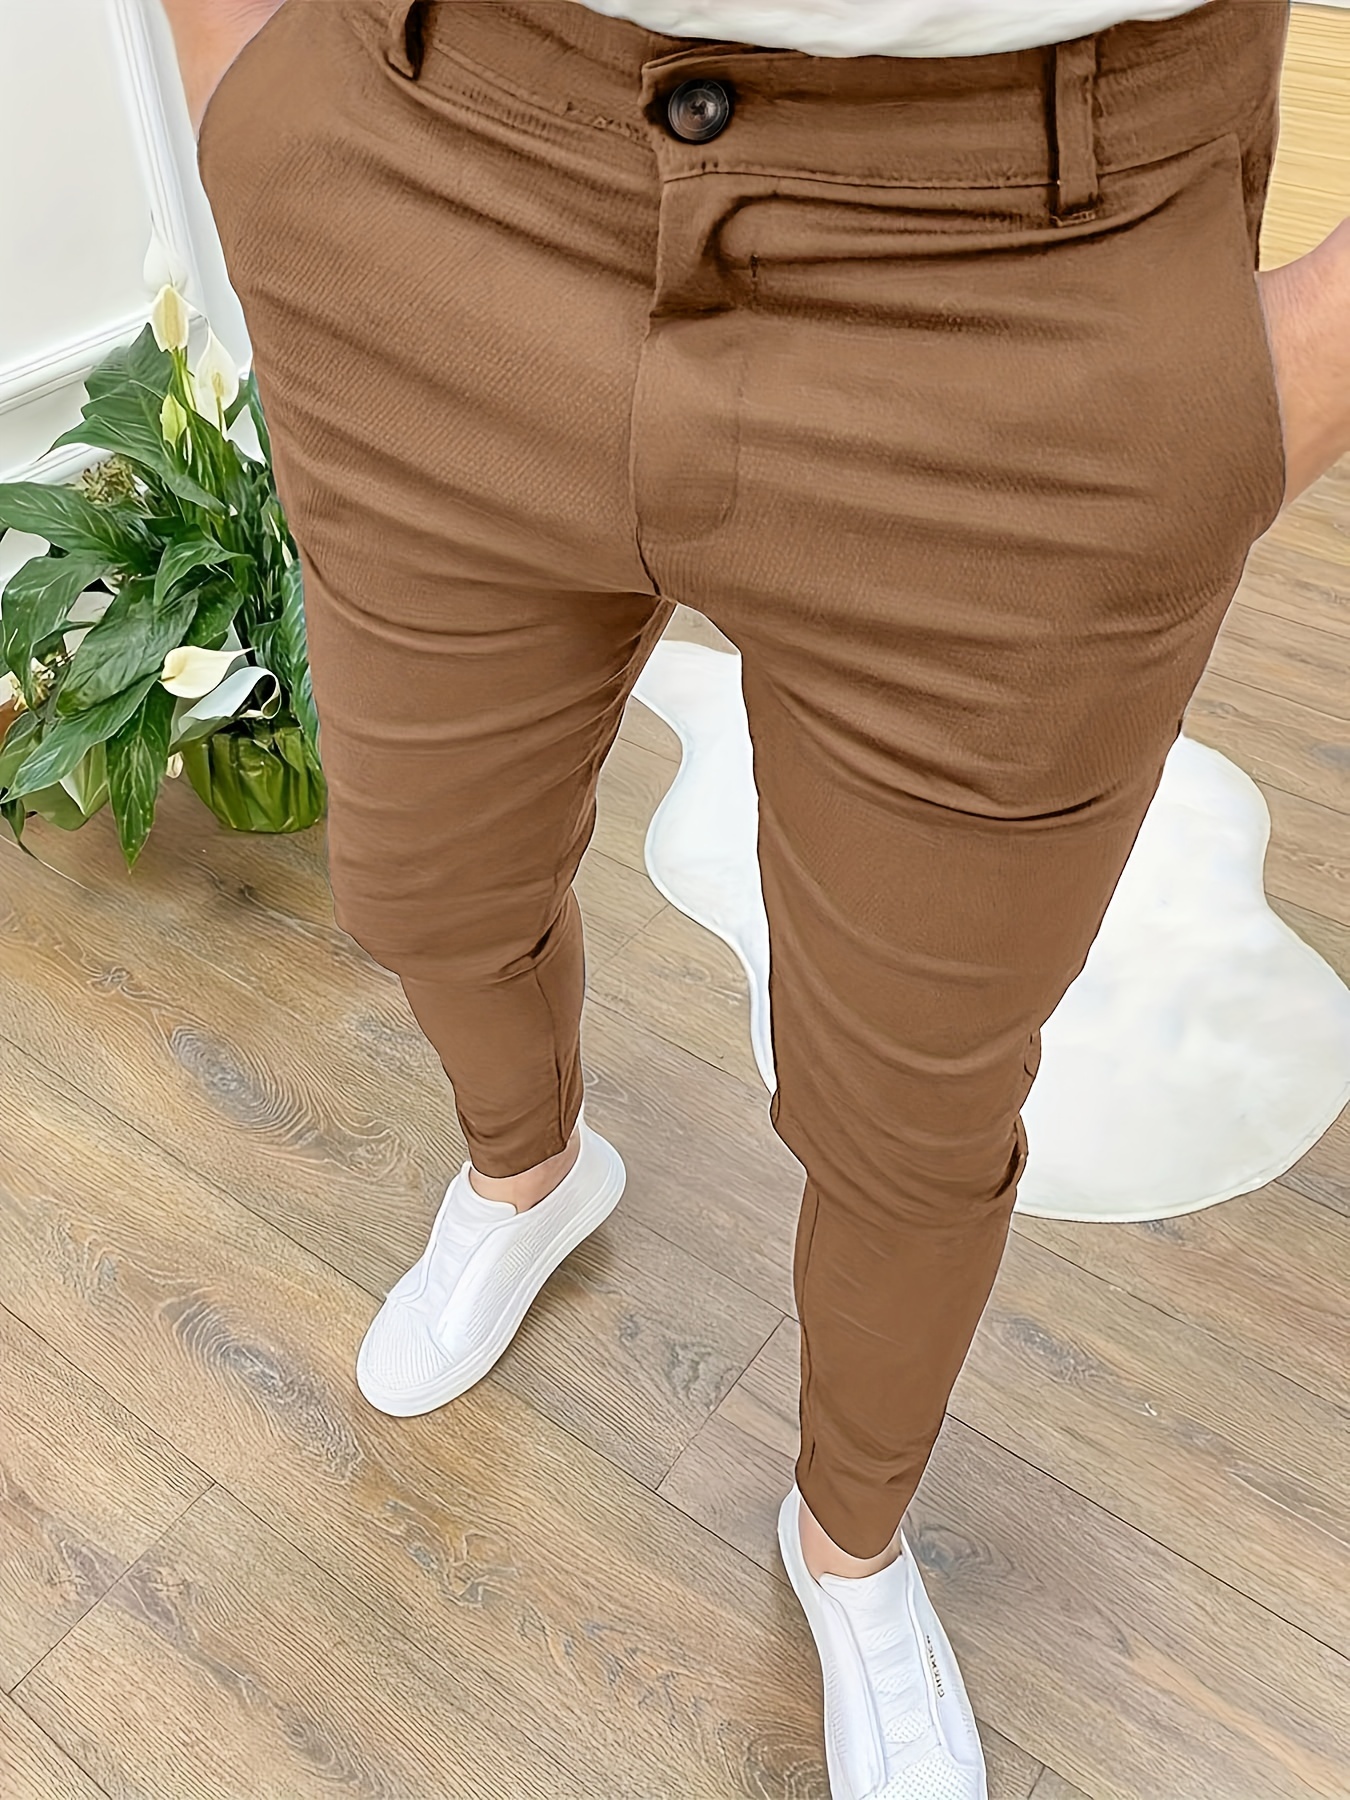 Casual Formal Mens Stretch Pants Business Slim Fit Straight Chino Trousers